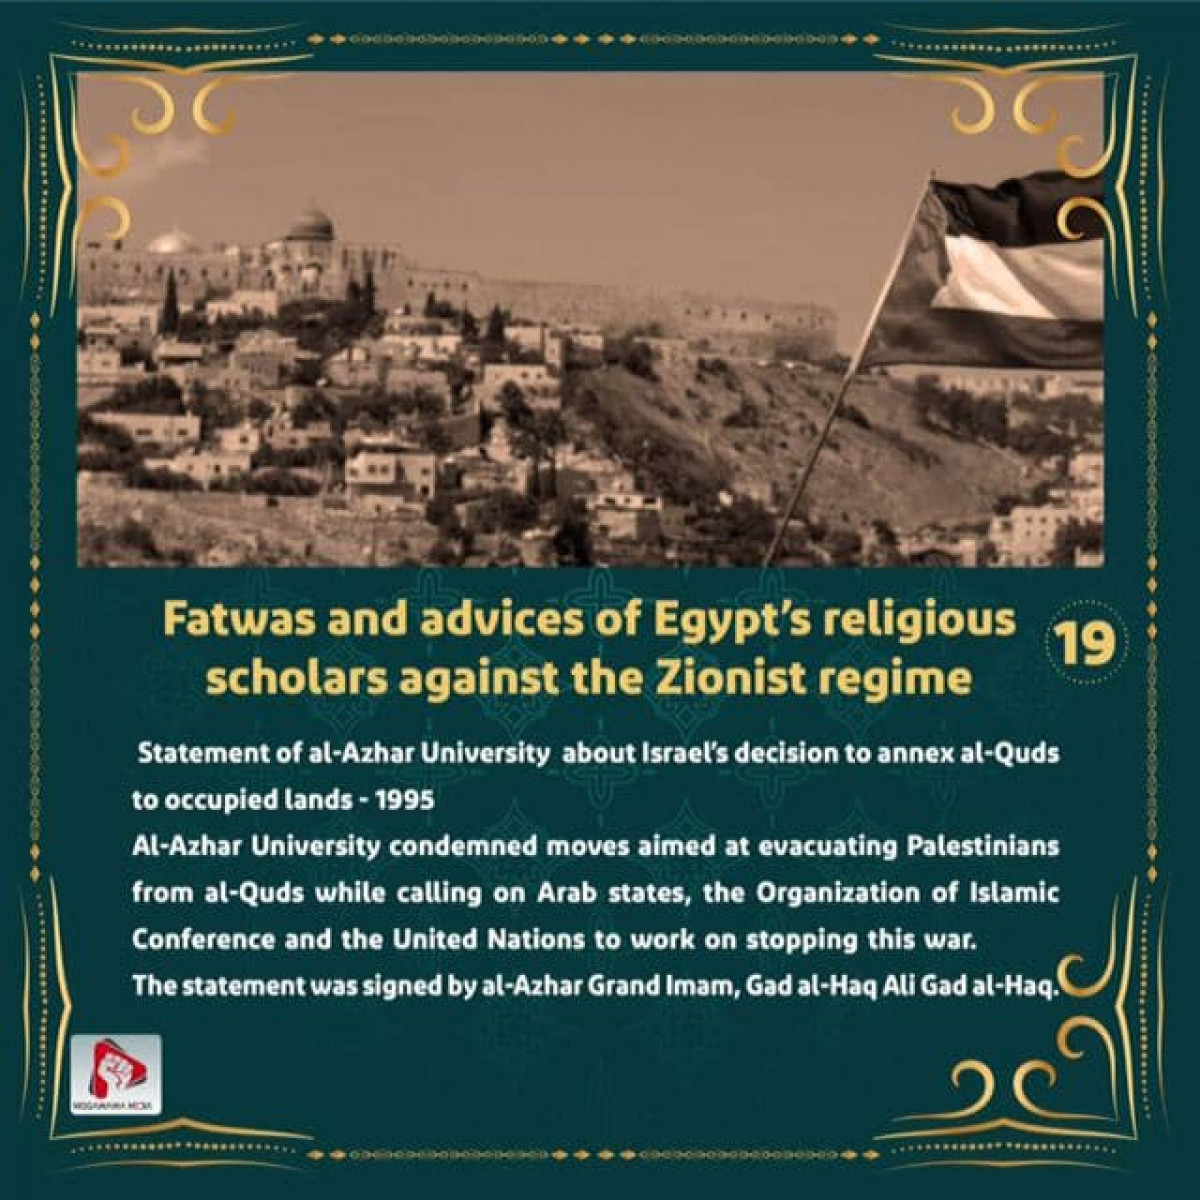 Fatwas and advices of Egypt's religious scholars against the Zionist regime 19